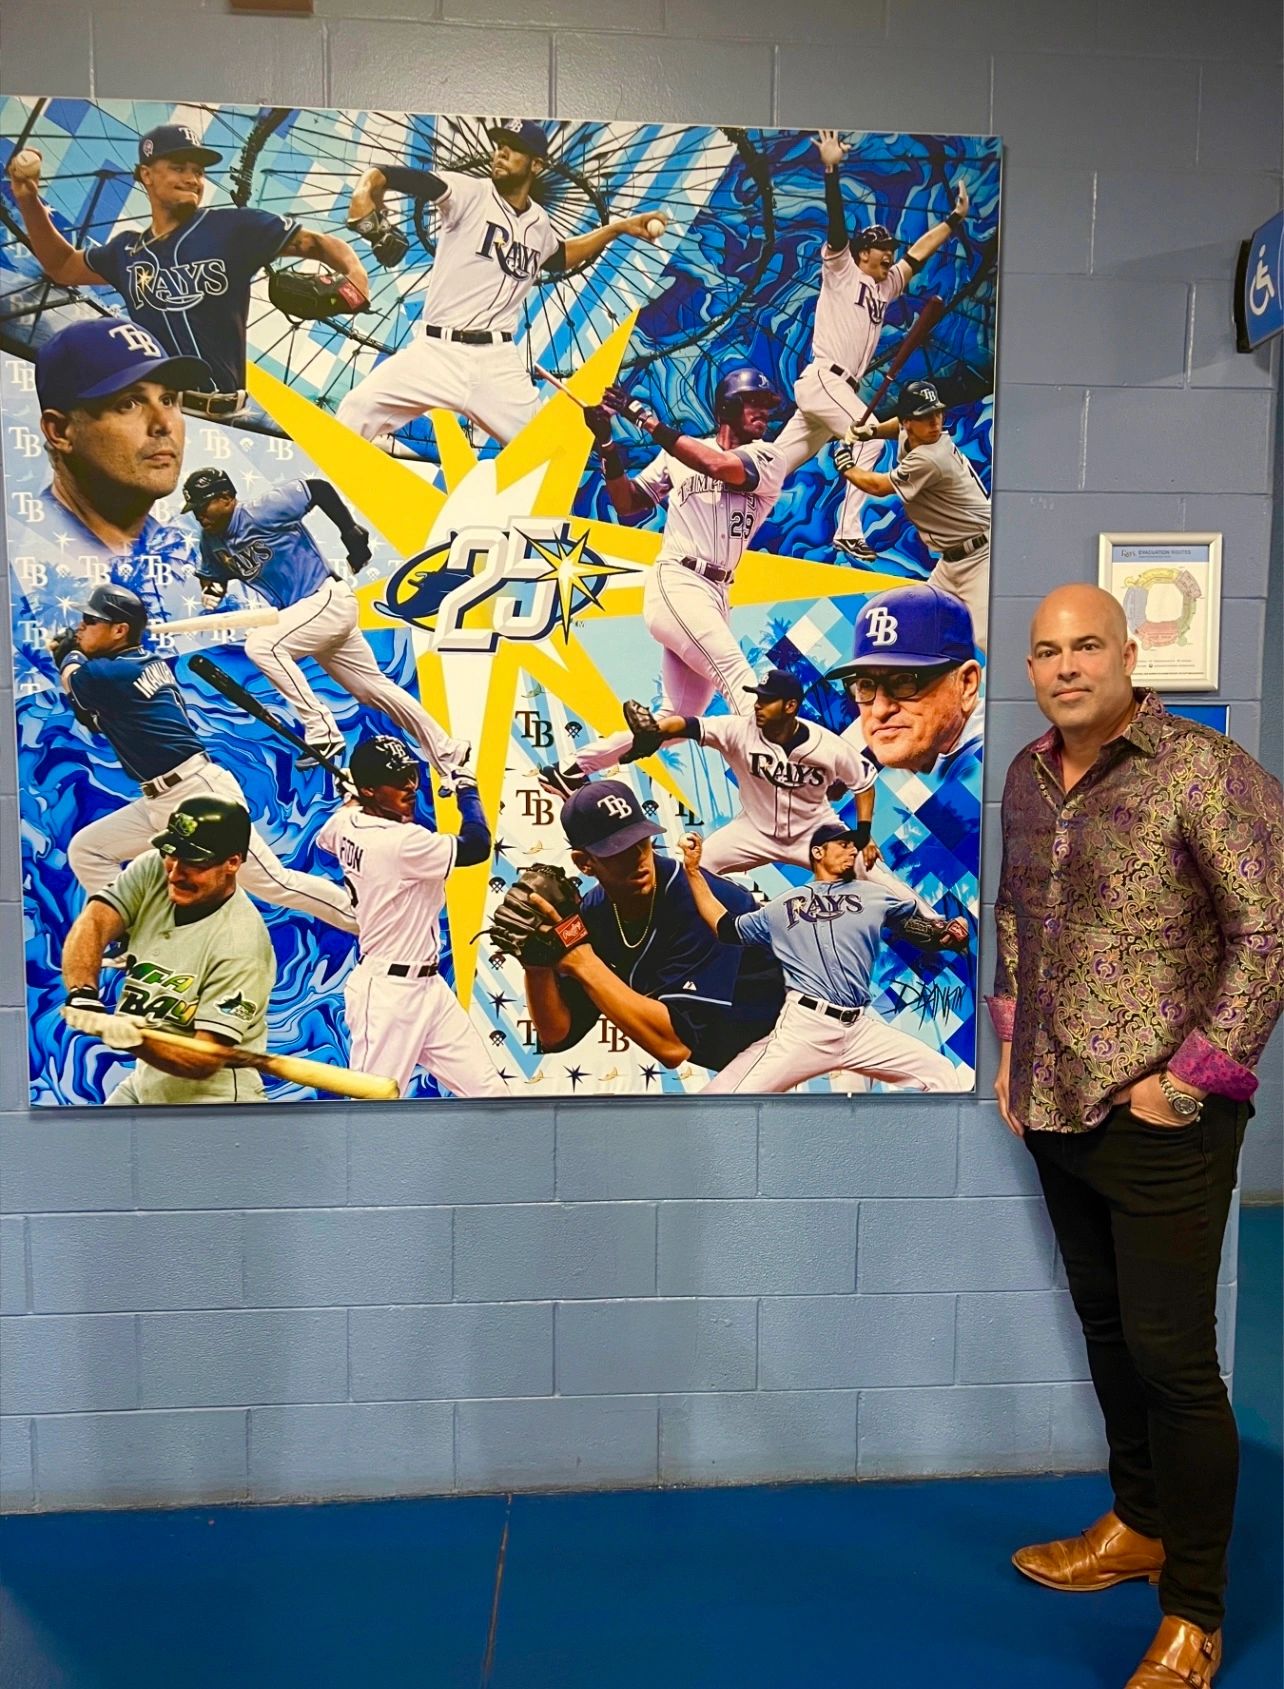 I was hired by the Tampa Bay Ray to create this piece celebrating their 25th anniversary. It is now 